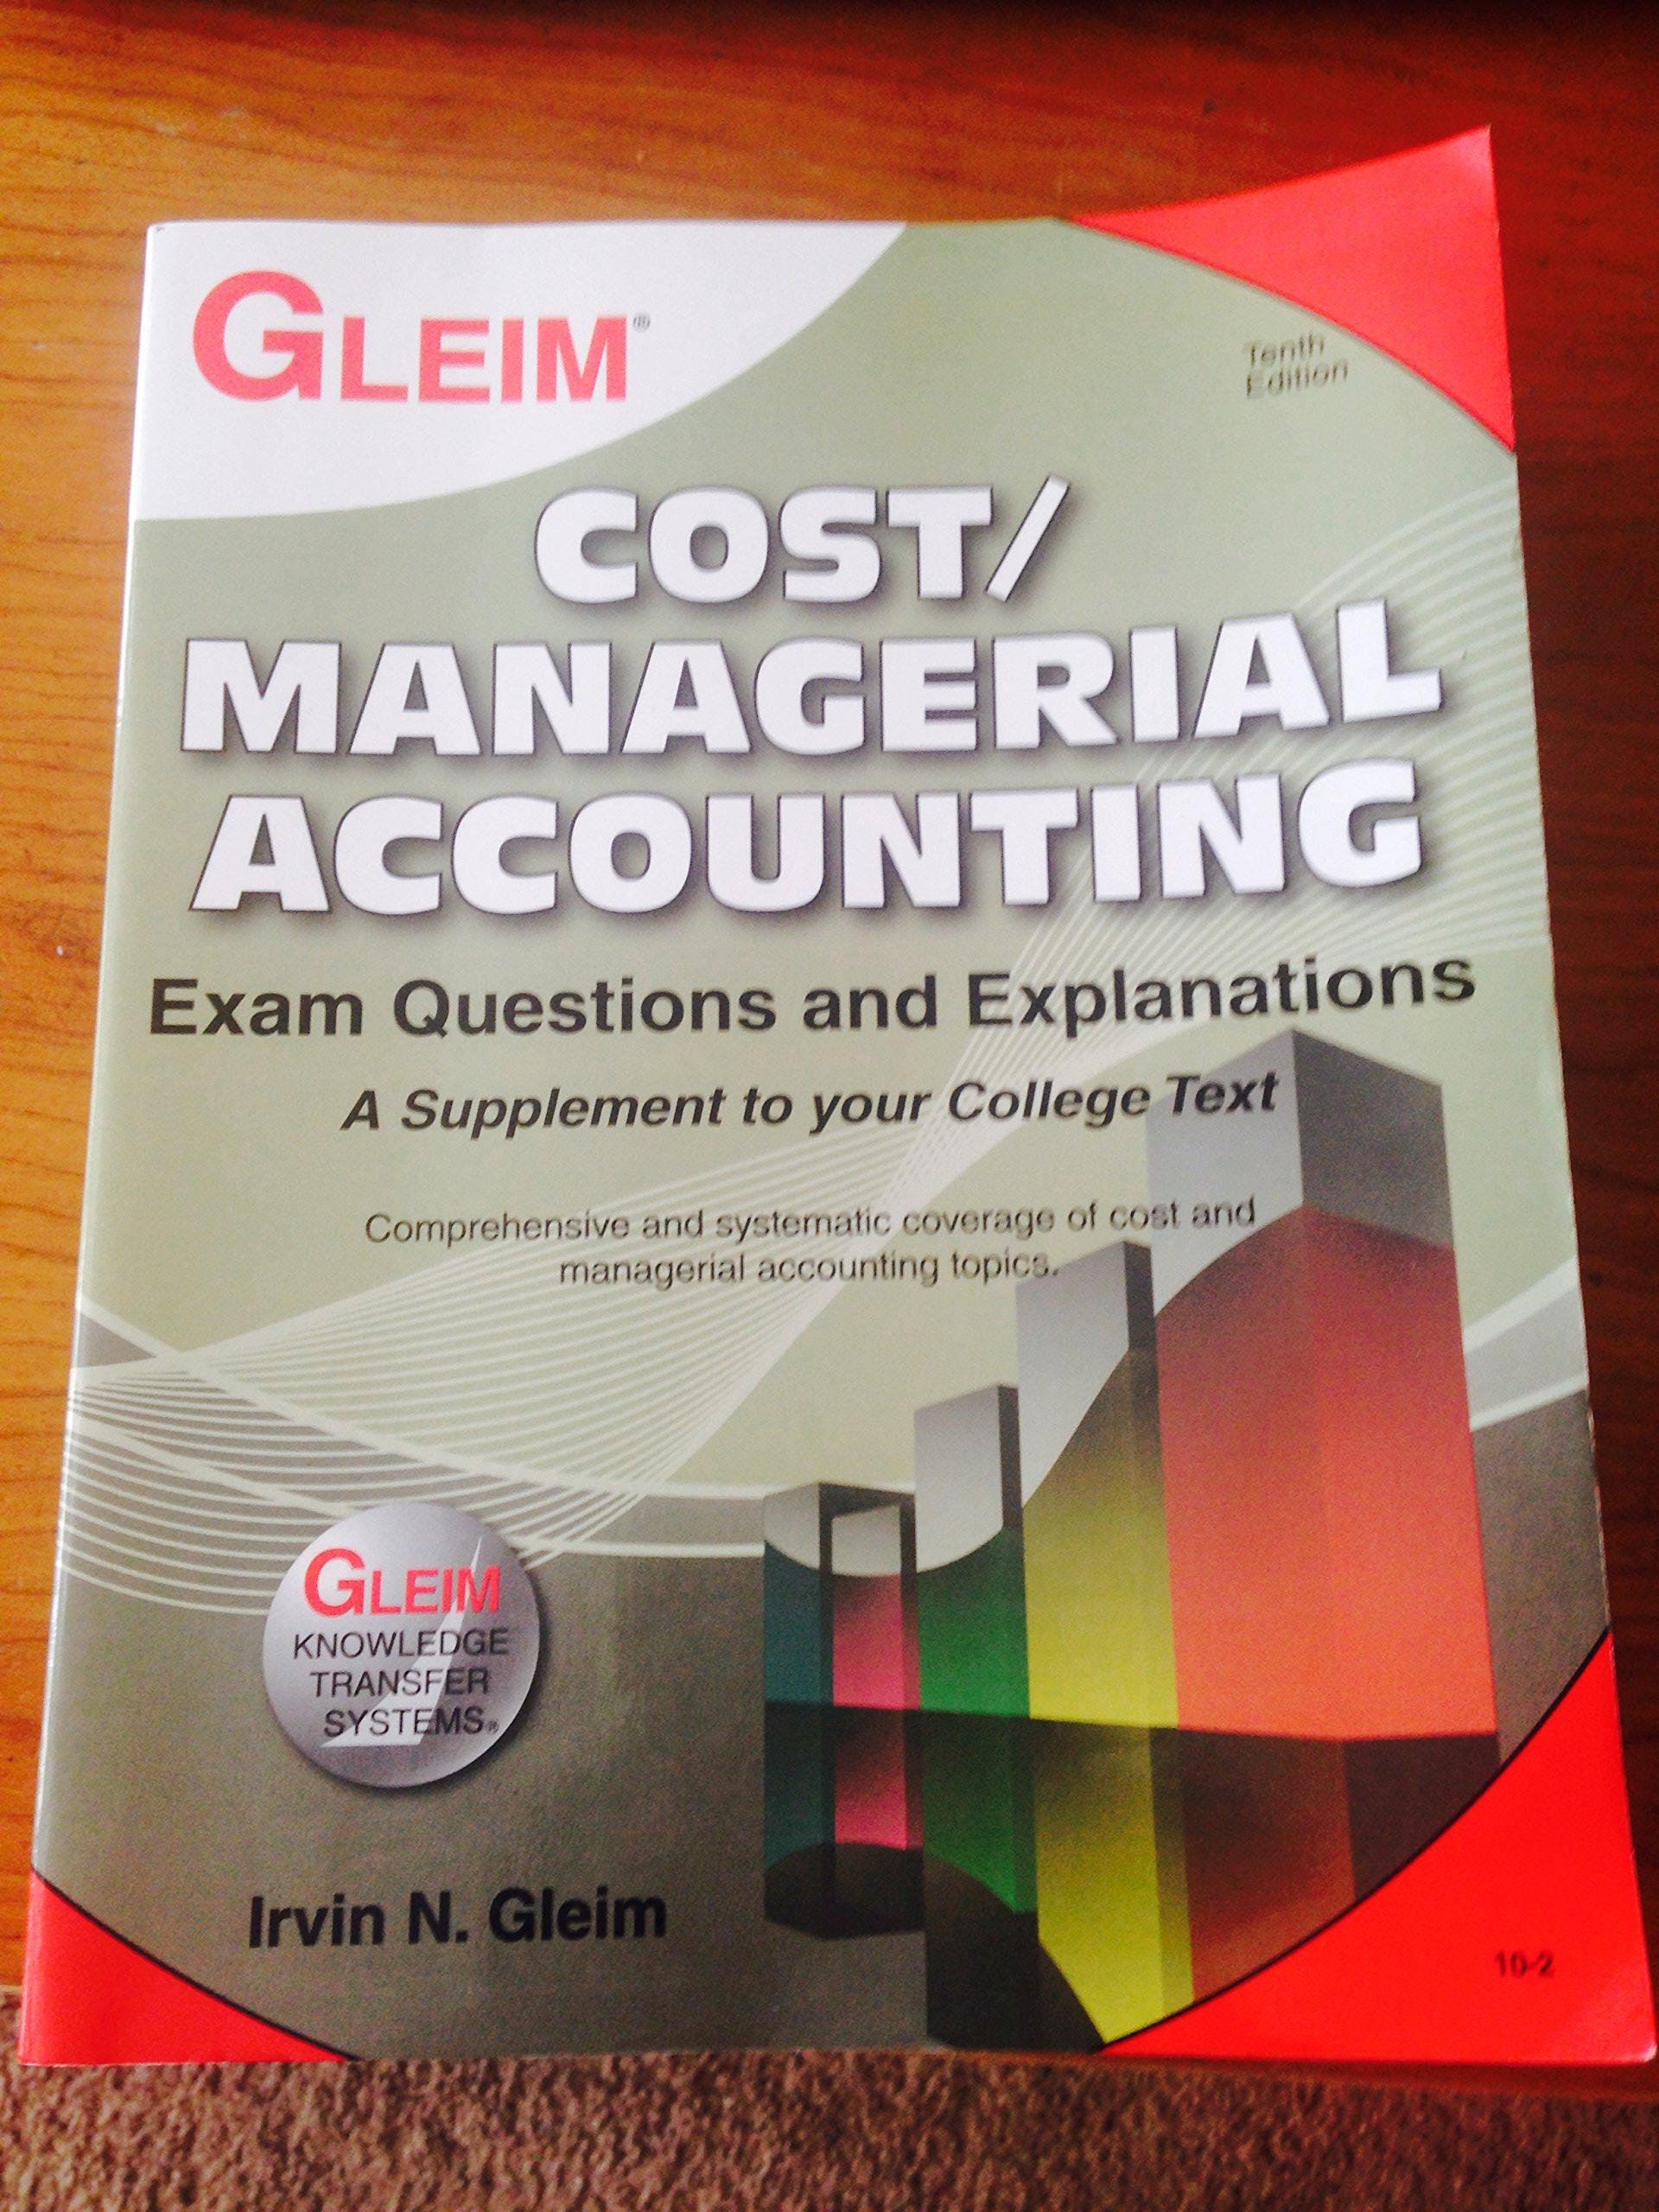 cost managerial accounting exam questions and explanations 10th edition irvin n.gleim 1581949200,